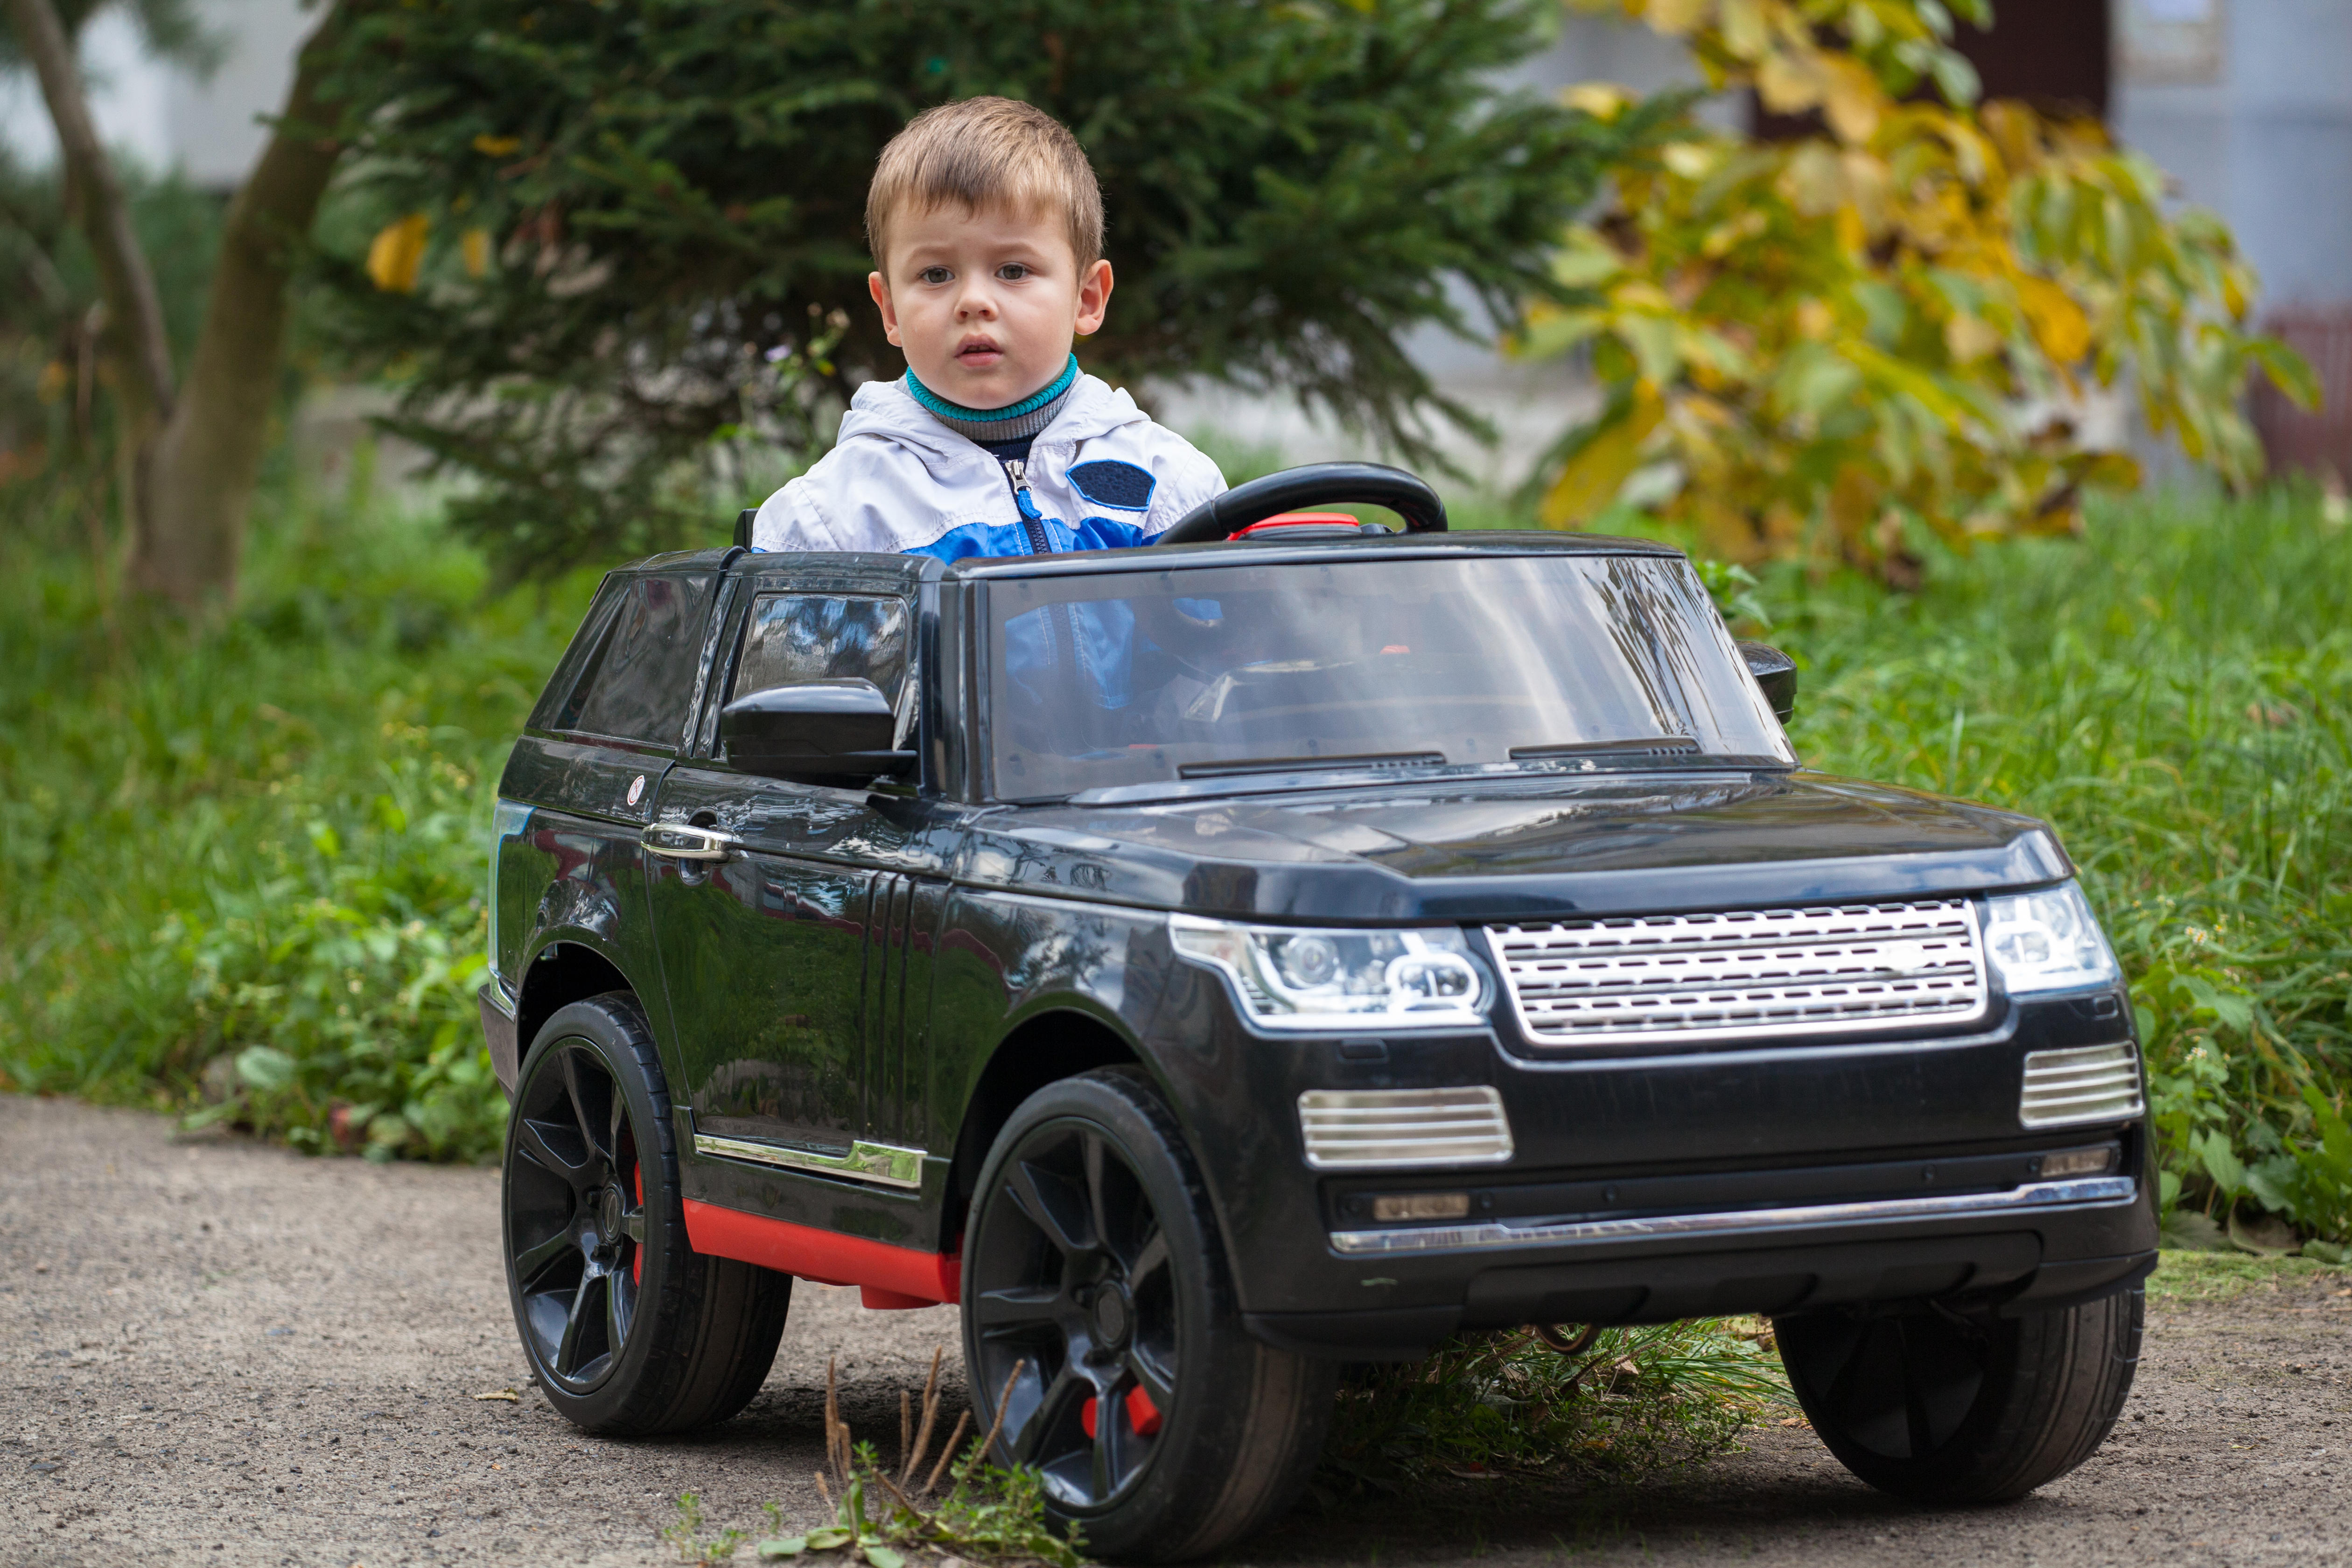 drivable toy cars for kids